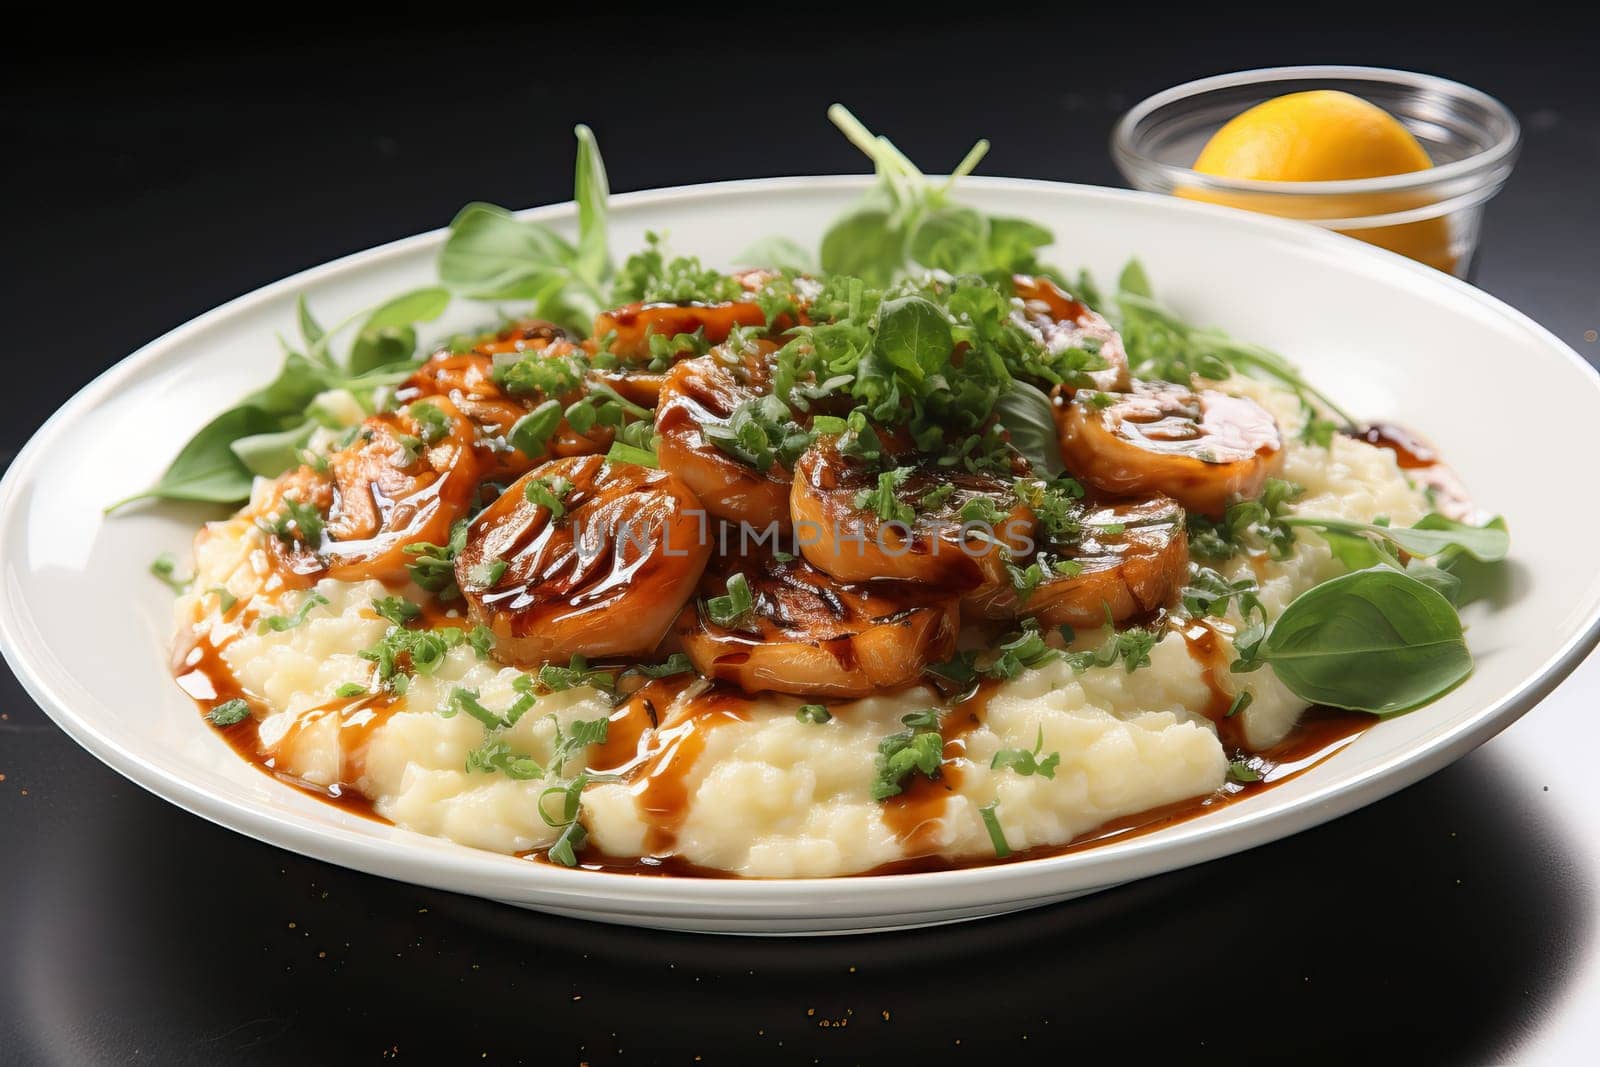 Risotto with mushrooms in a large white plate, serving food in a restaurant.